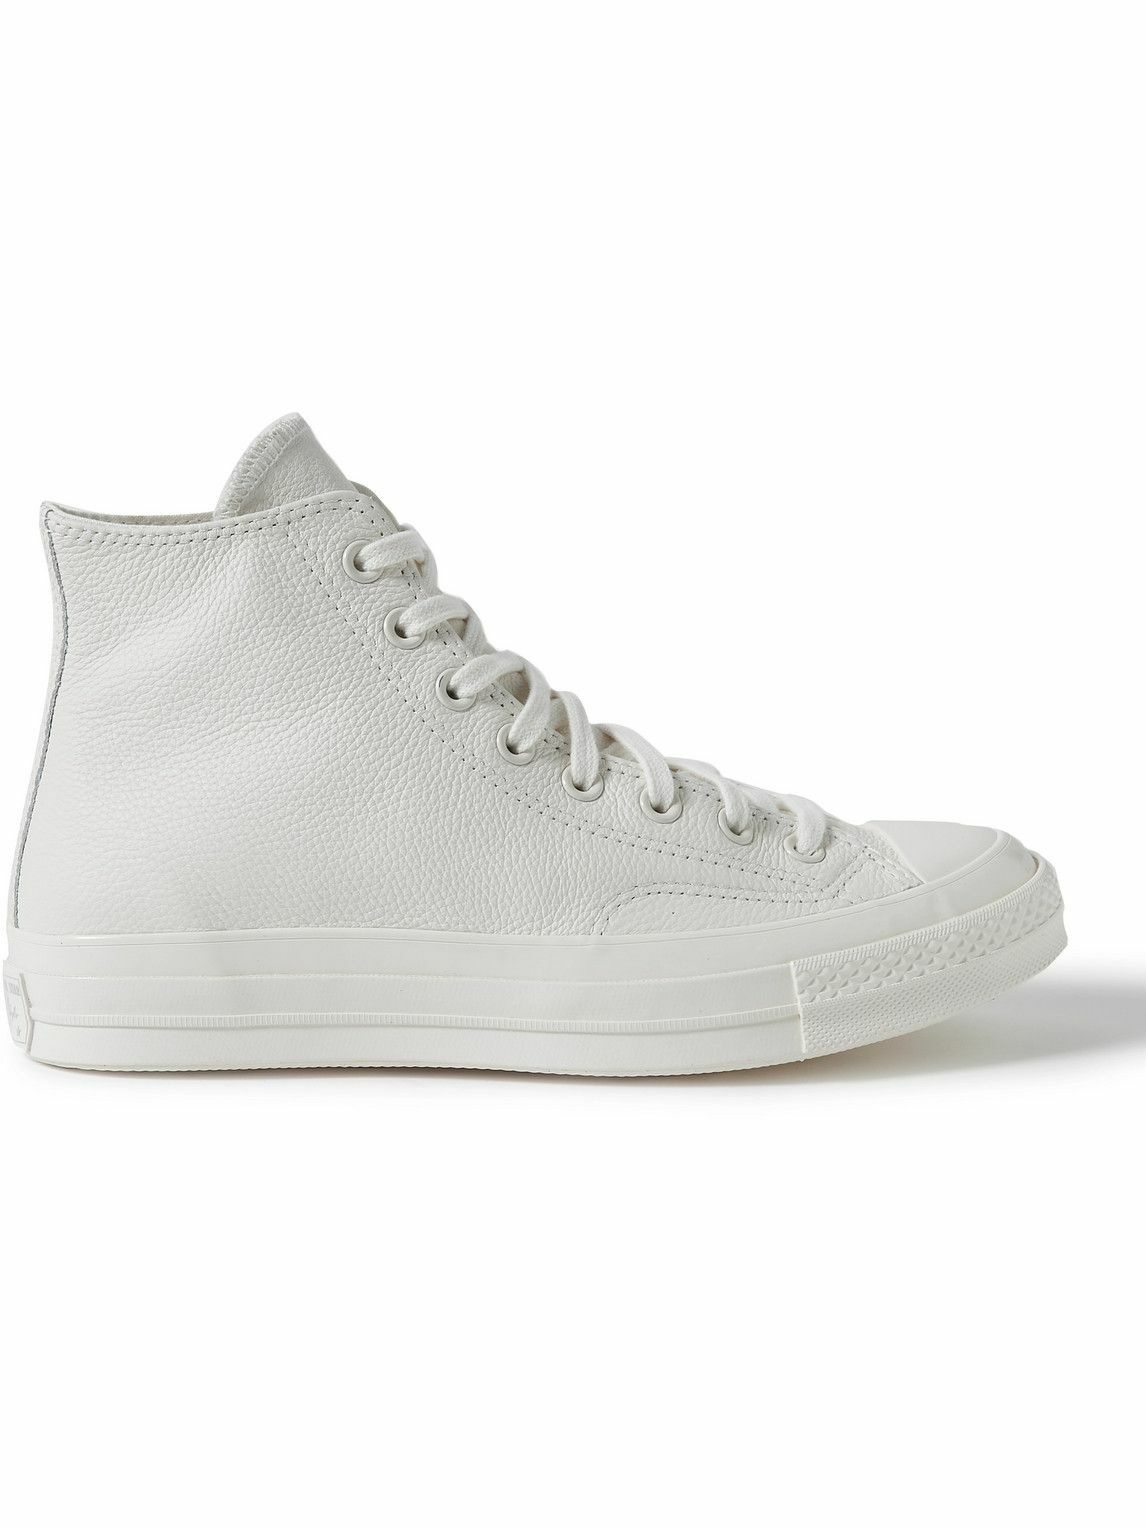 Converse - Chuck 70 Full-Grain Leather High-Top Sneakers - White Converse